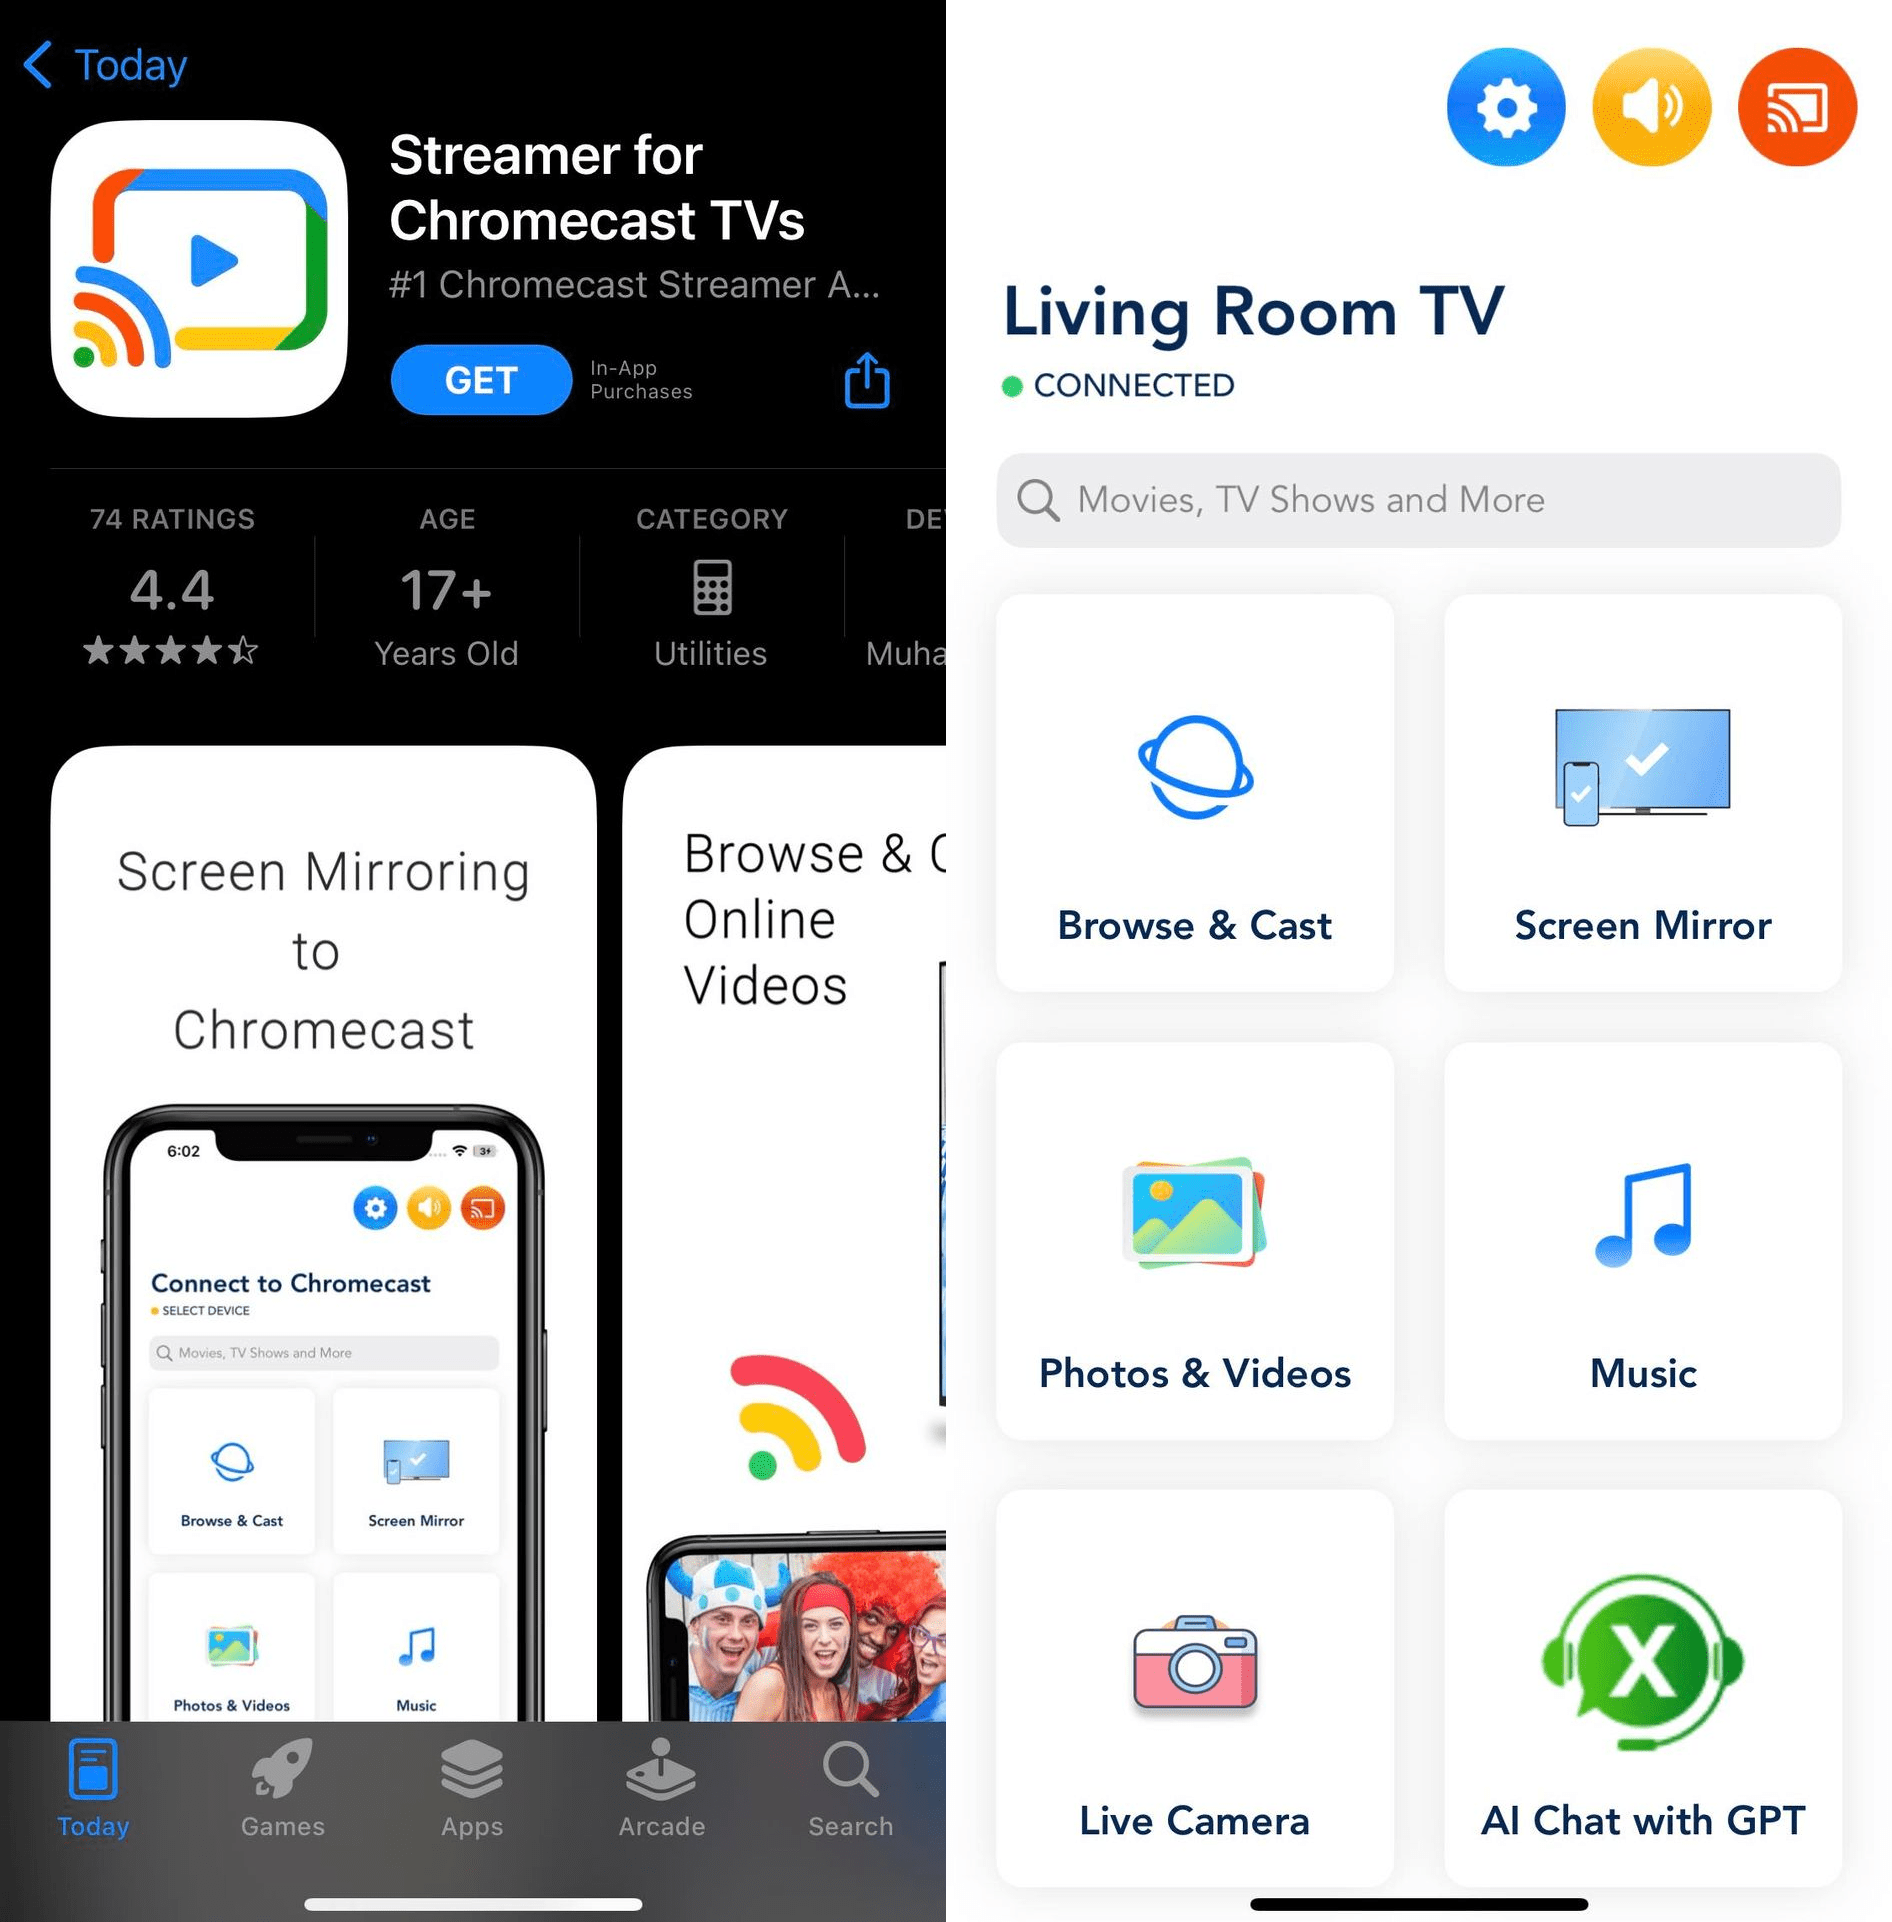 The Streamer for Chromecast TVs app on the App Store and its homepage when launched